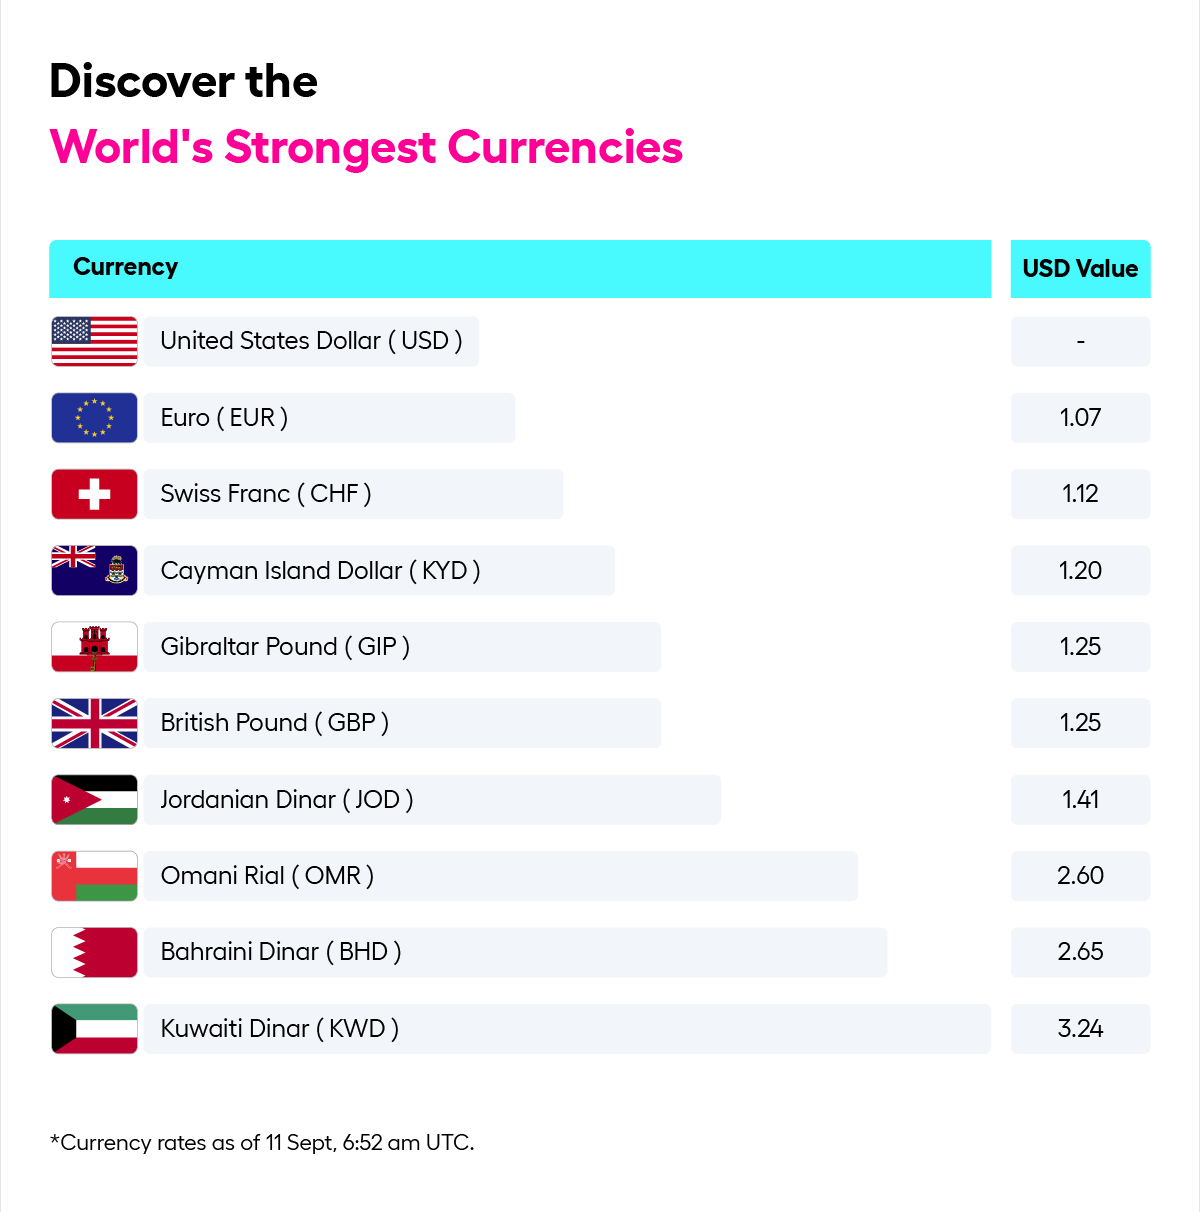 The 10 most valuable currencies in the world